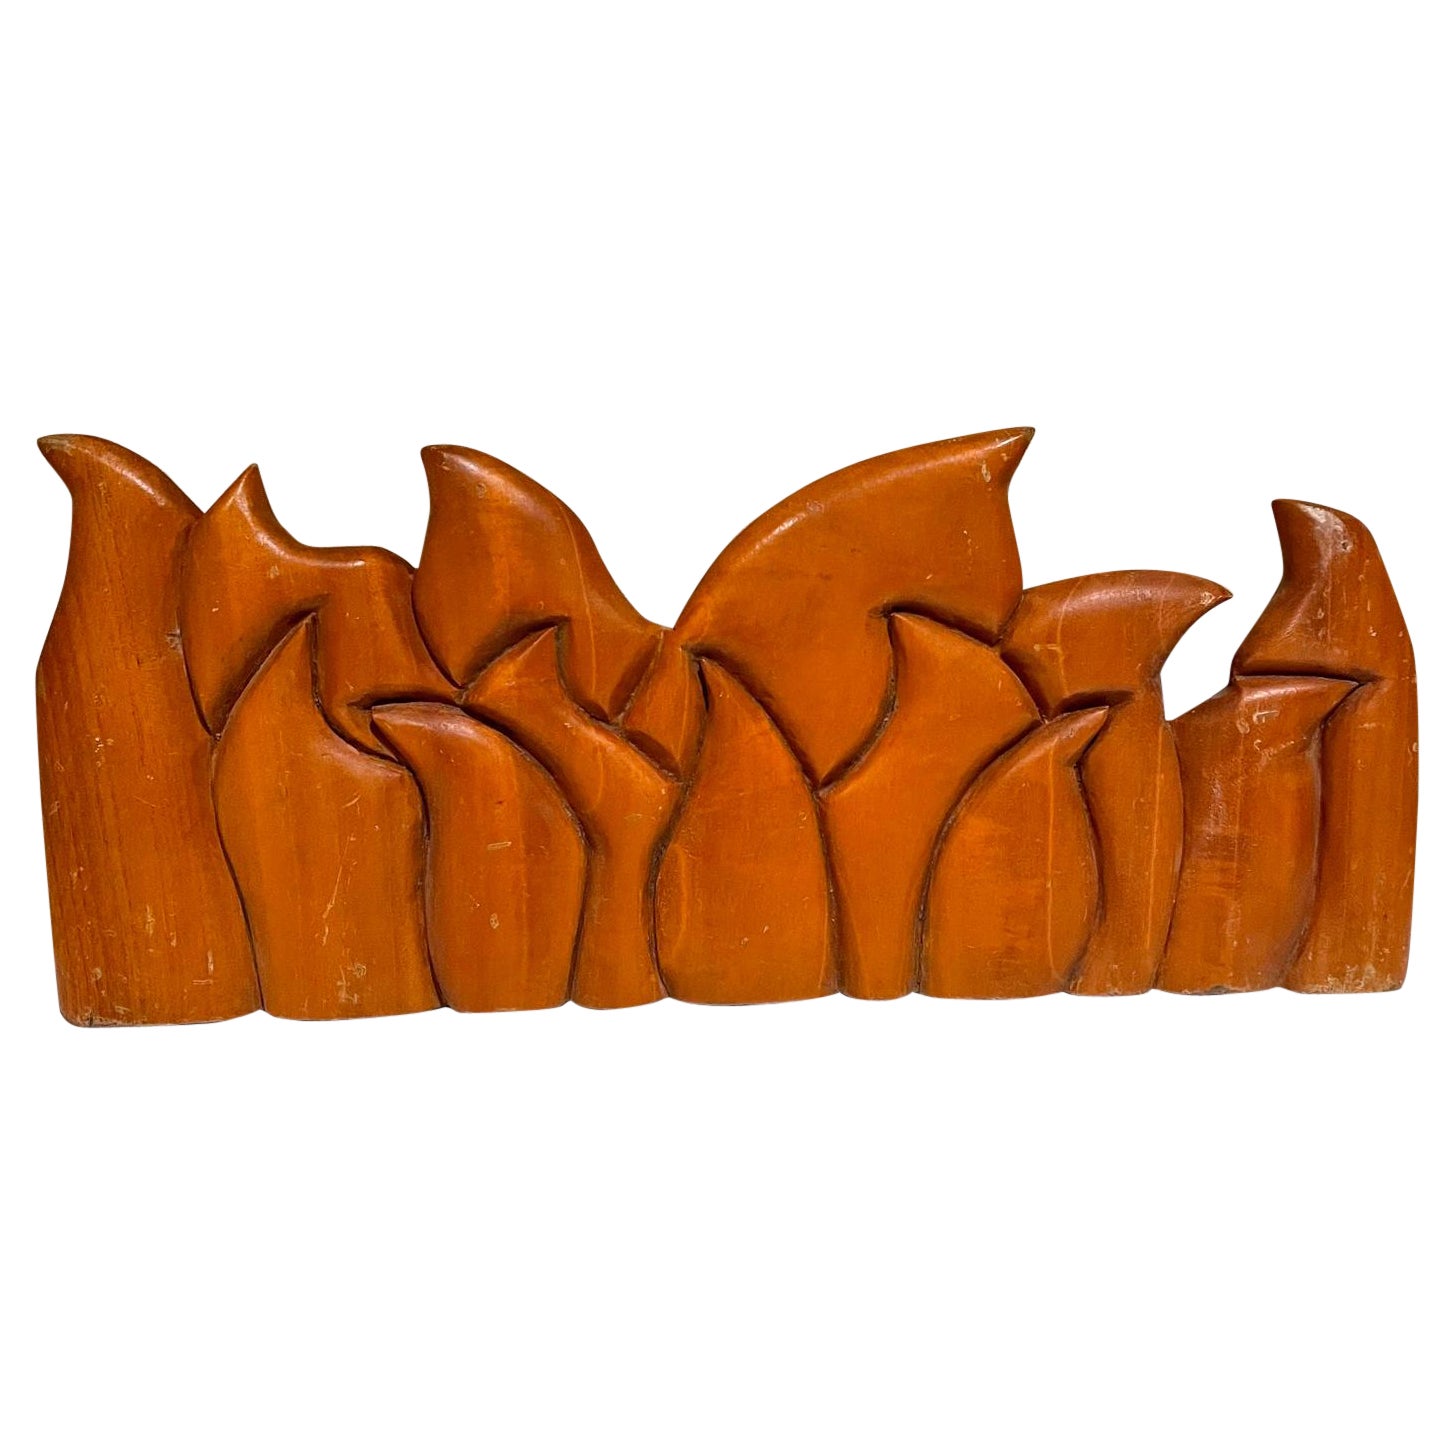 1999 Victor Rozo Last Supper Abstract Wood Sculpture Mexico DF